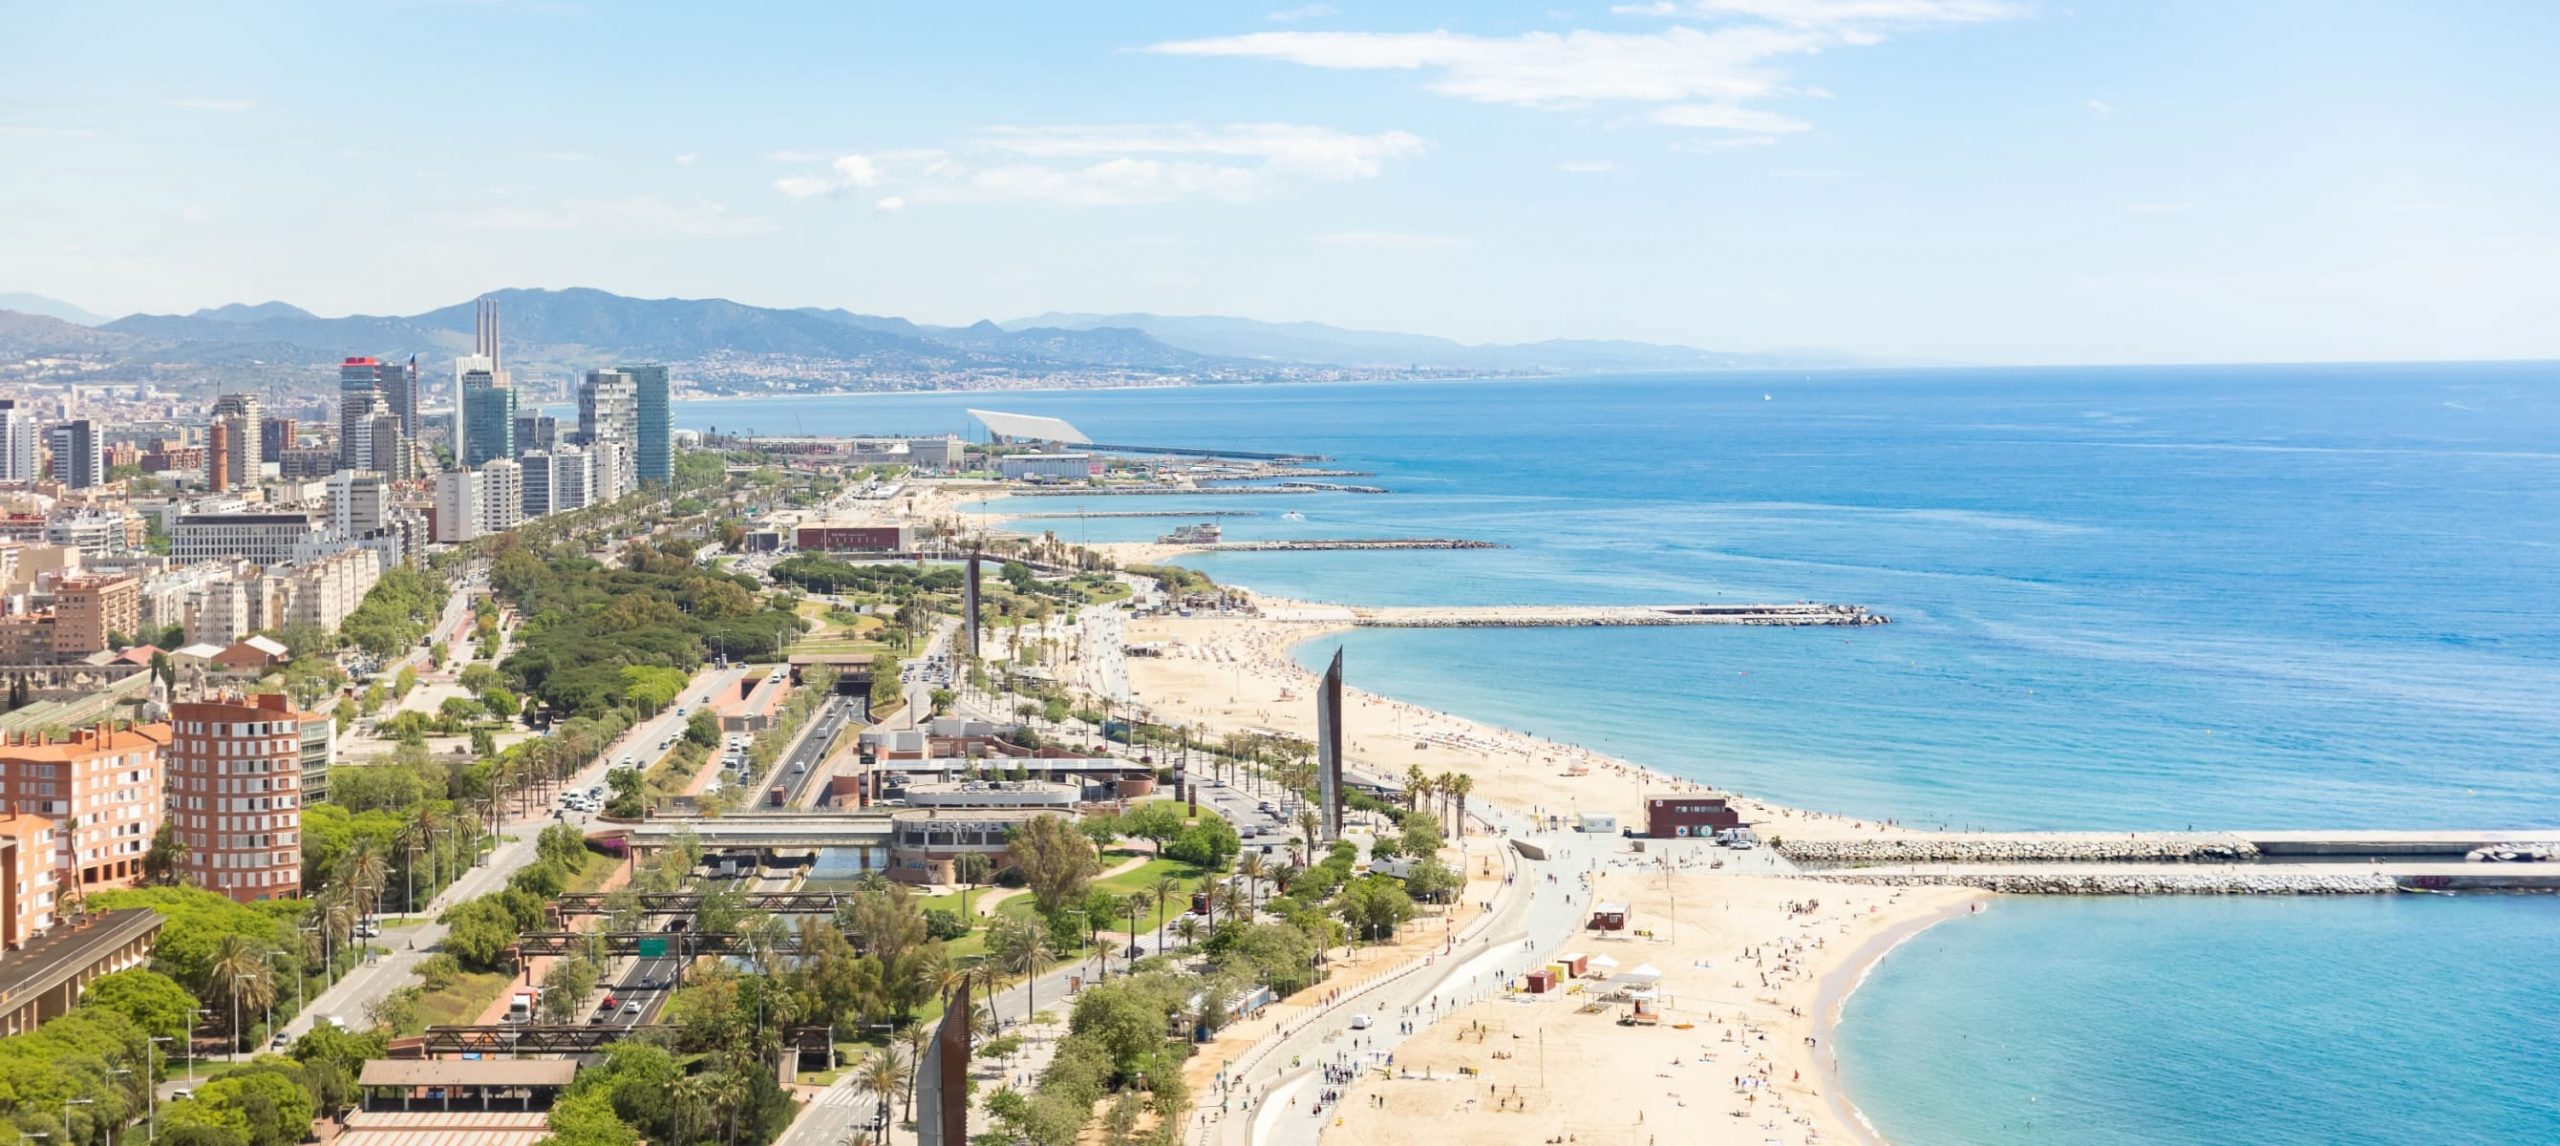 The 10 Best Beaches in Barcelona & Surroundings post thumbnail image